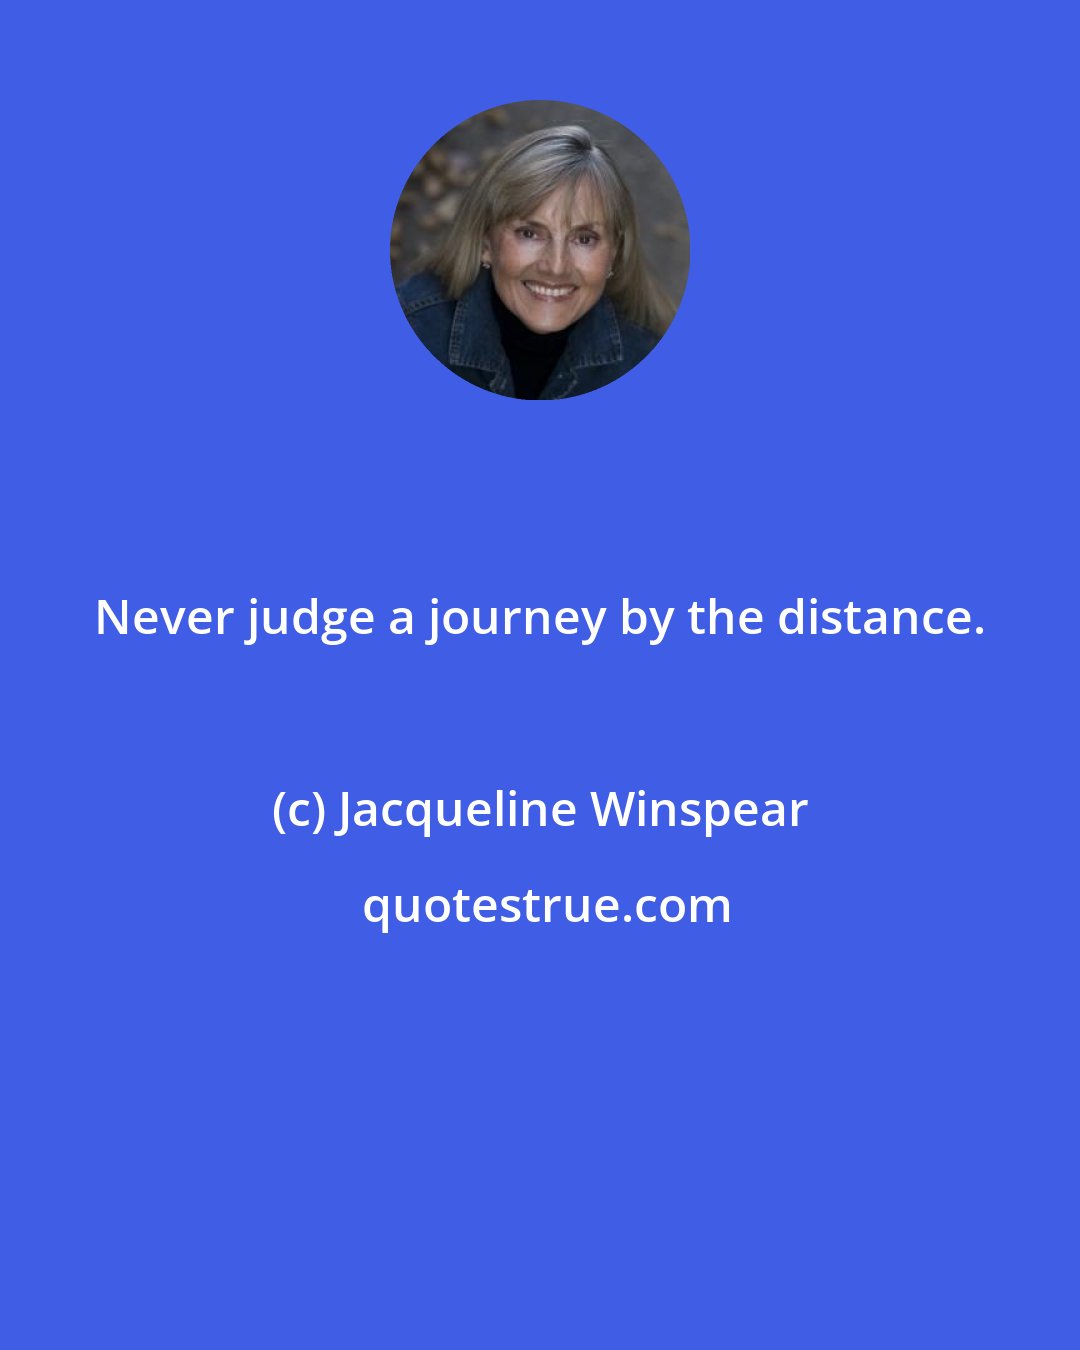 Jacqueline Winspear: Never judge a journey by the distance.